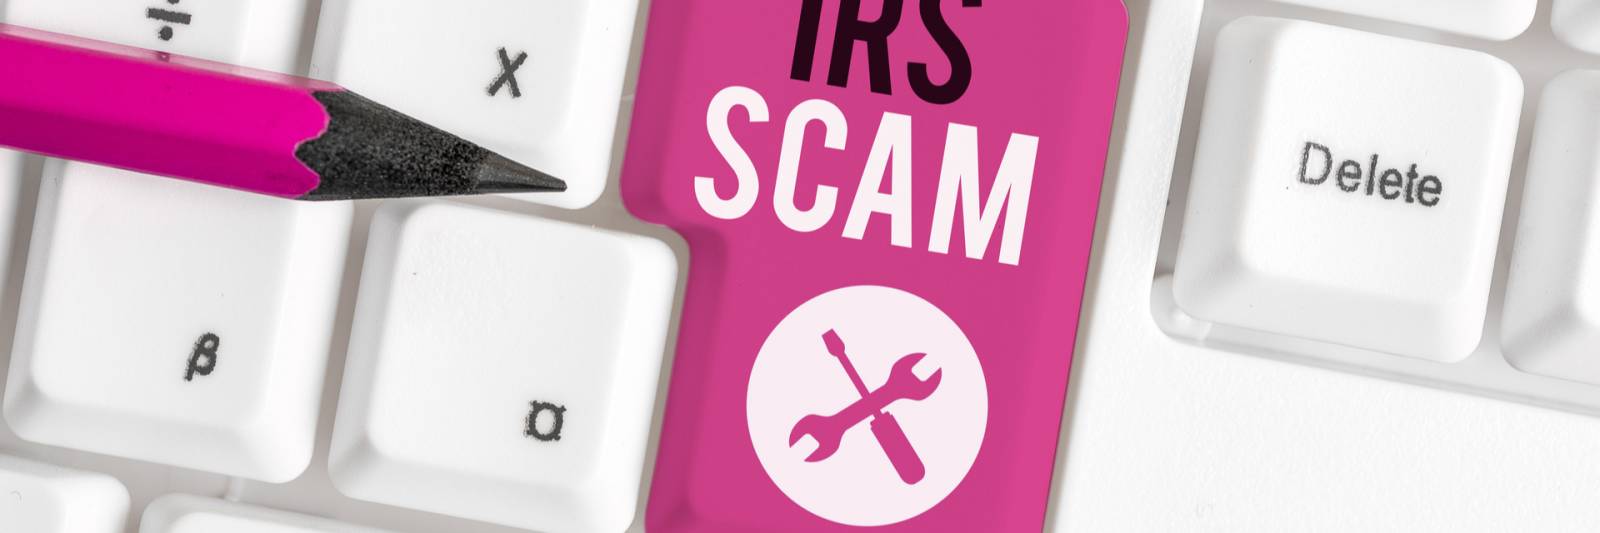 tax refund scammers target university staff and students